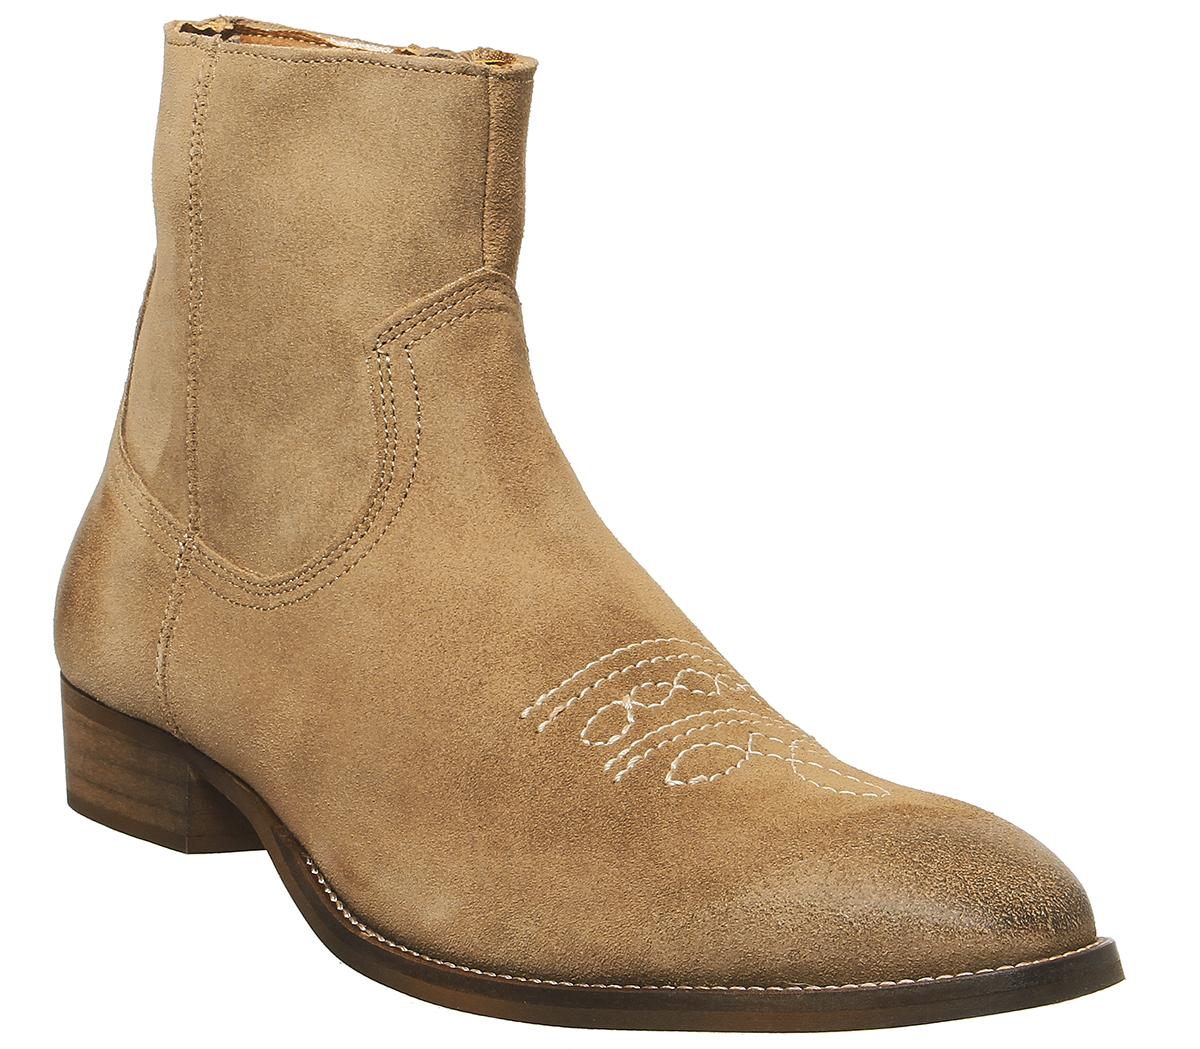 suede cowgirl boots